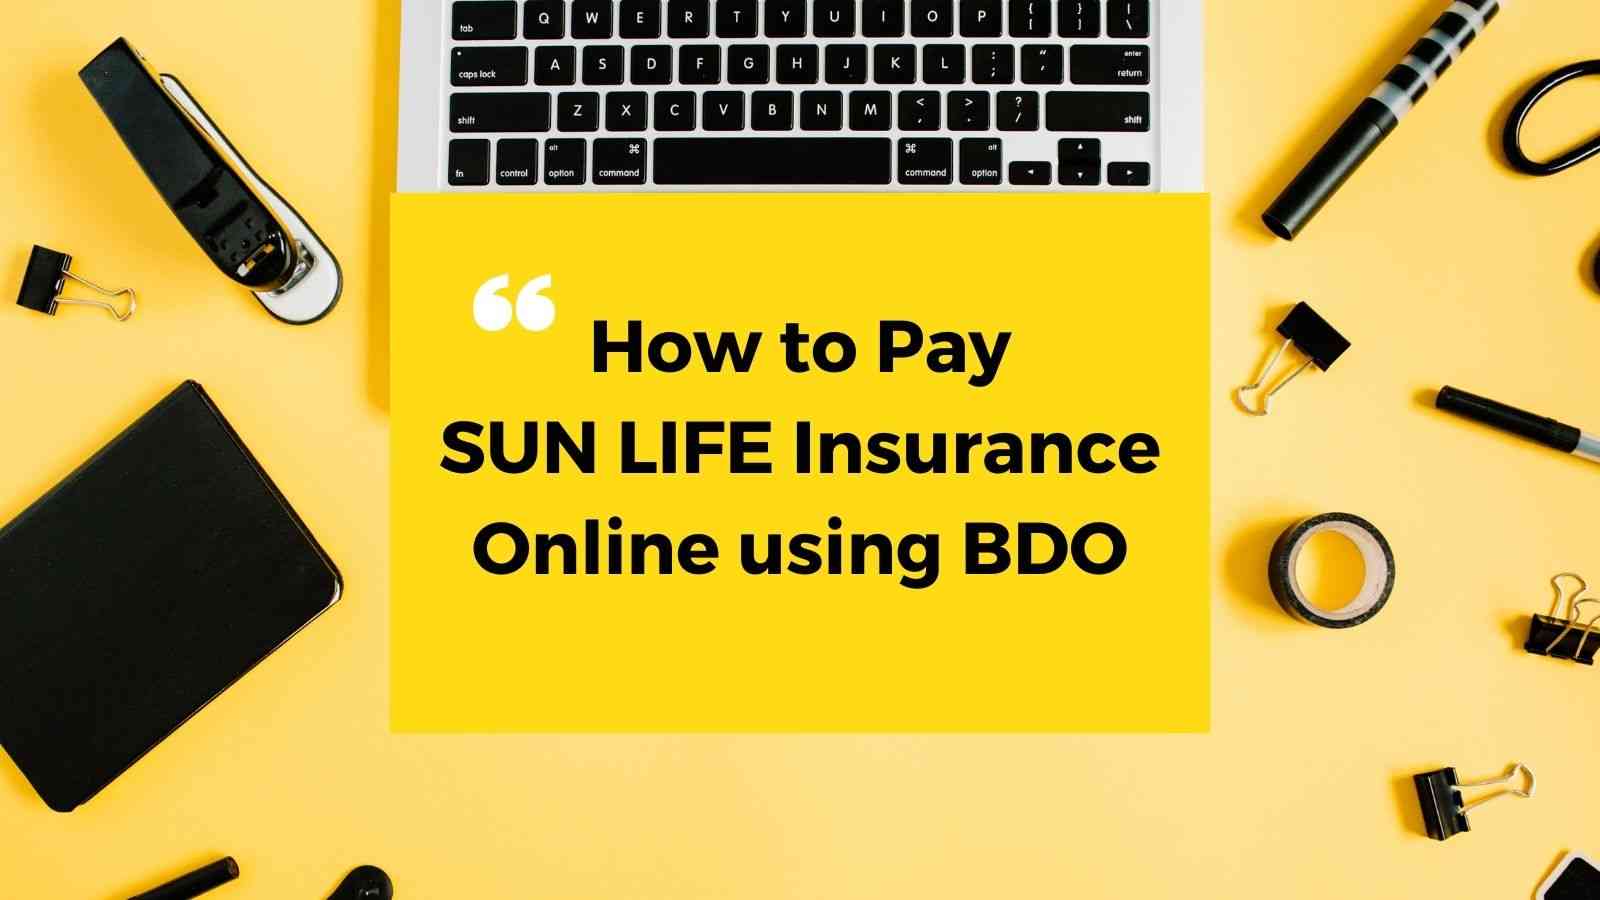 how to pay sun life insurance using bdo online banking